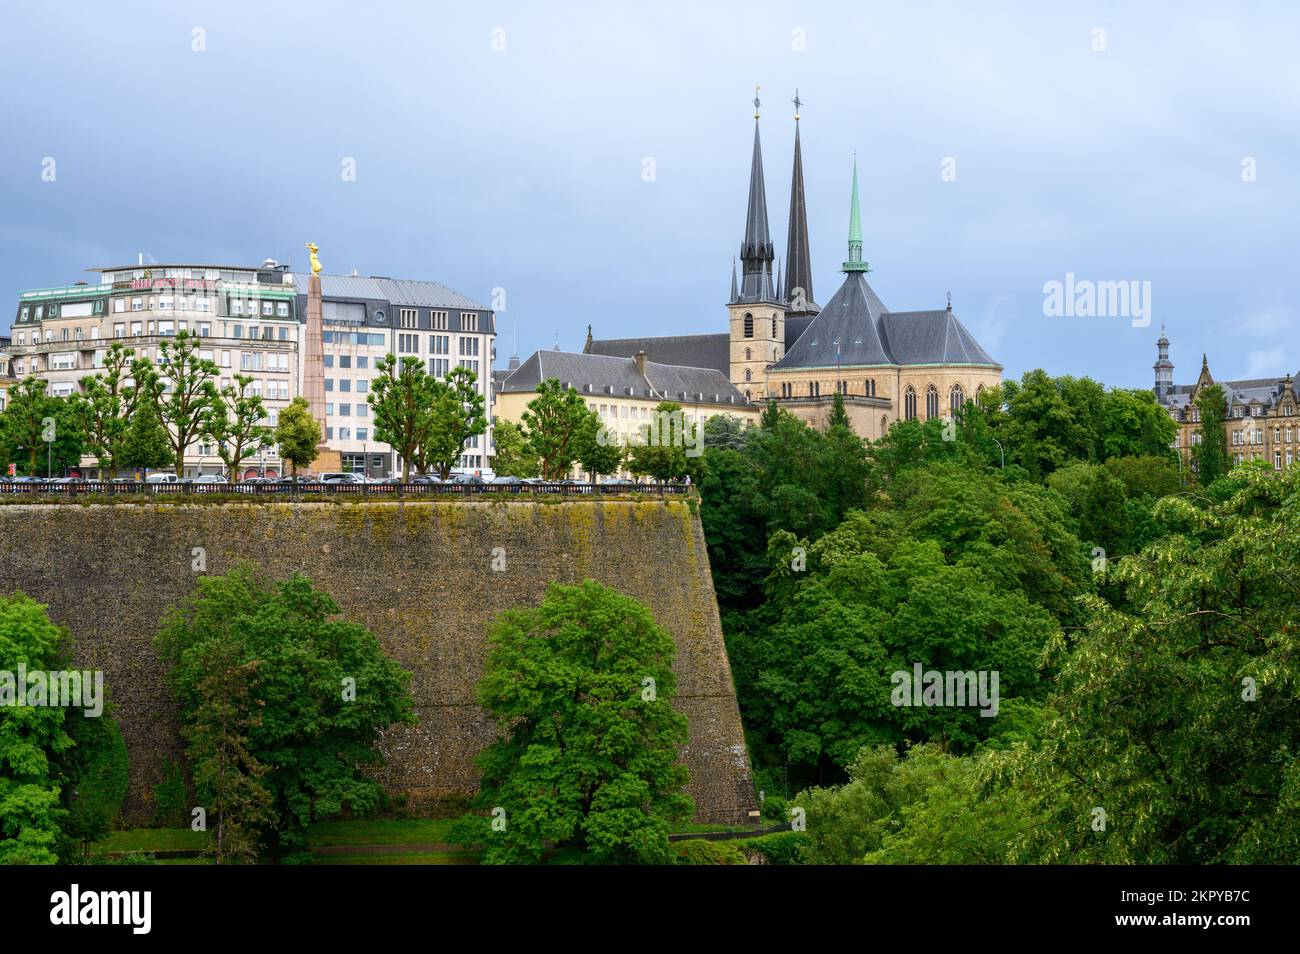 A view of the city of Luxembourg with the Pétrusse Parks, the Notre-Dame Cathedral and Gëlle Fra (Monument of Remembrance). Stock Photo